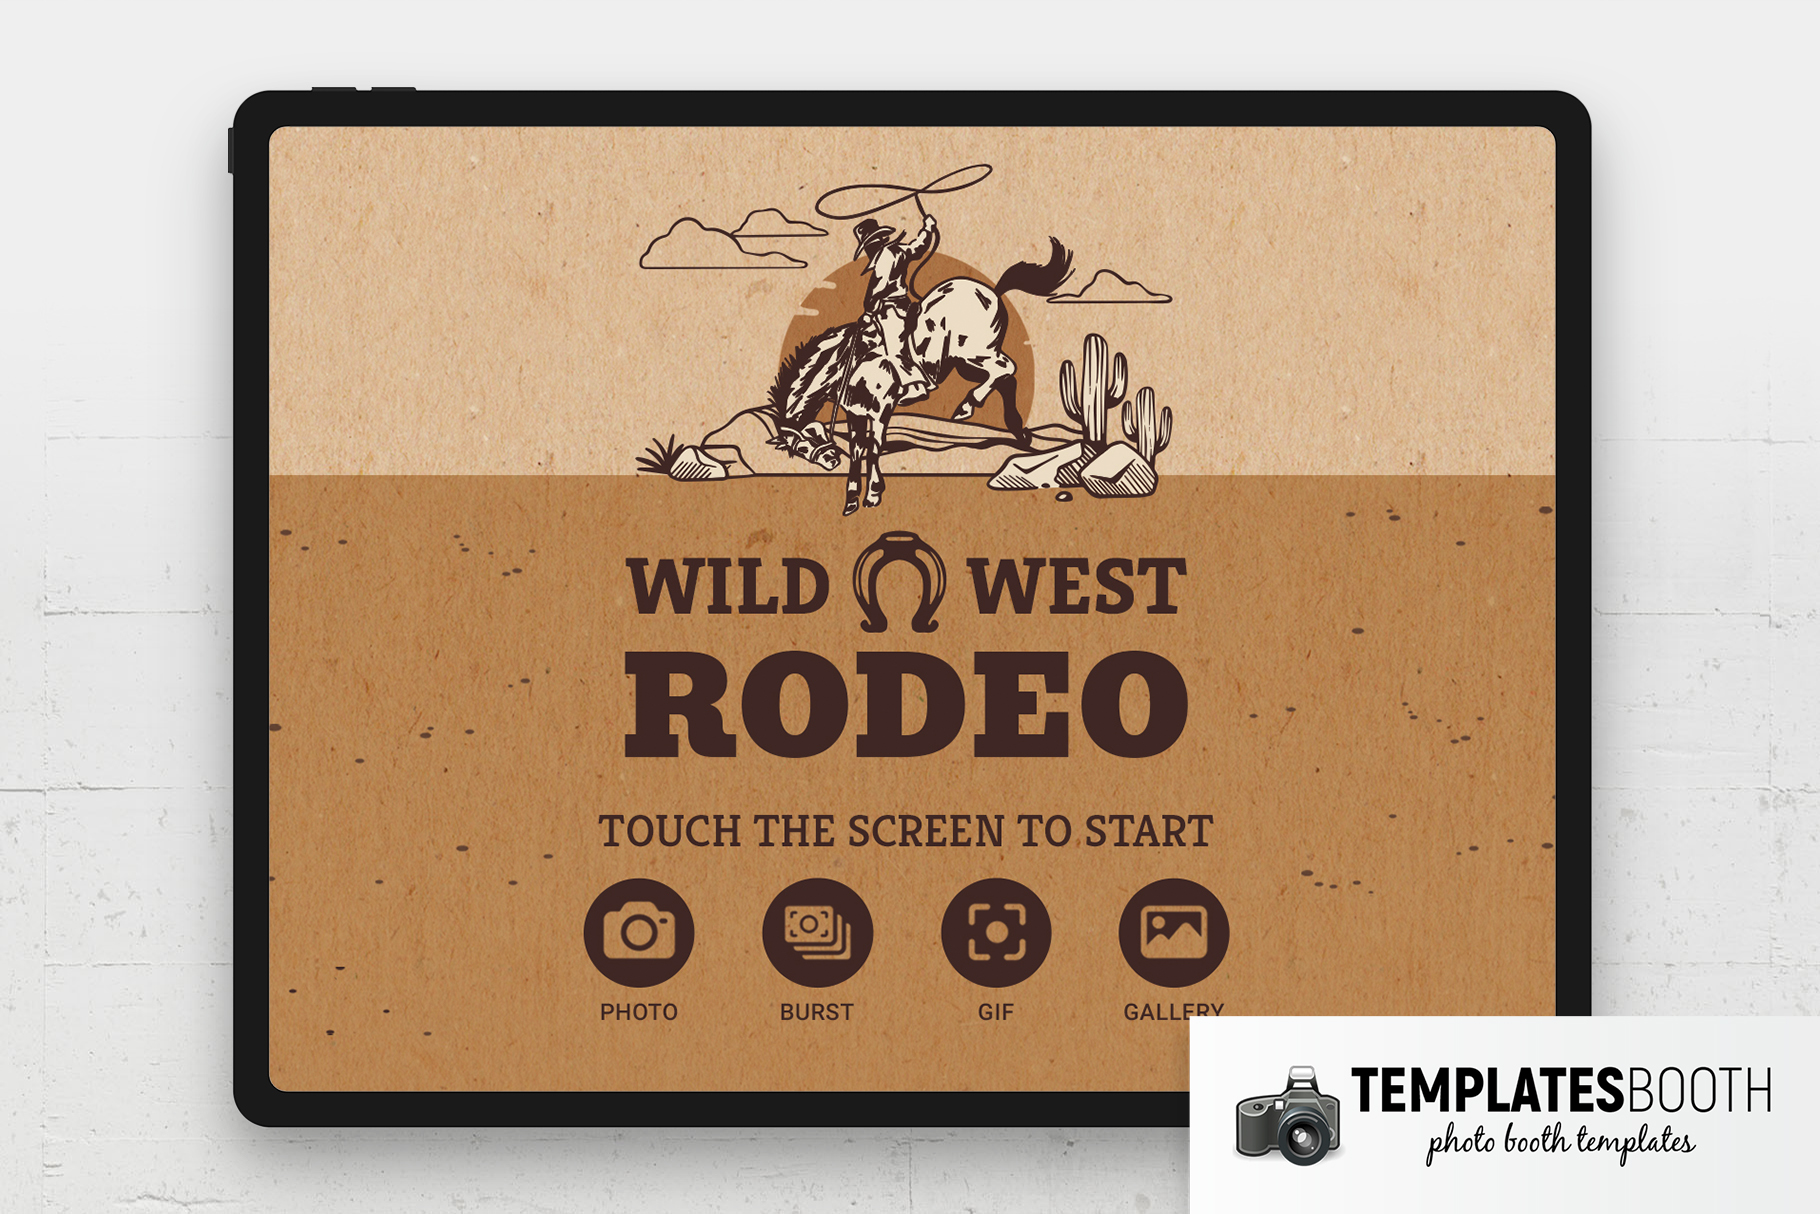 Rodeo Party Photo Booth Welcome Screen